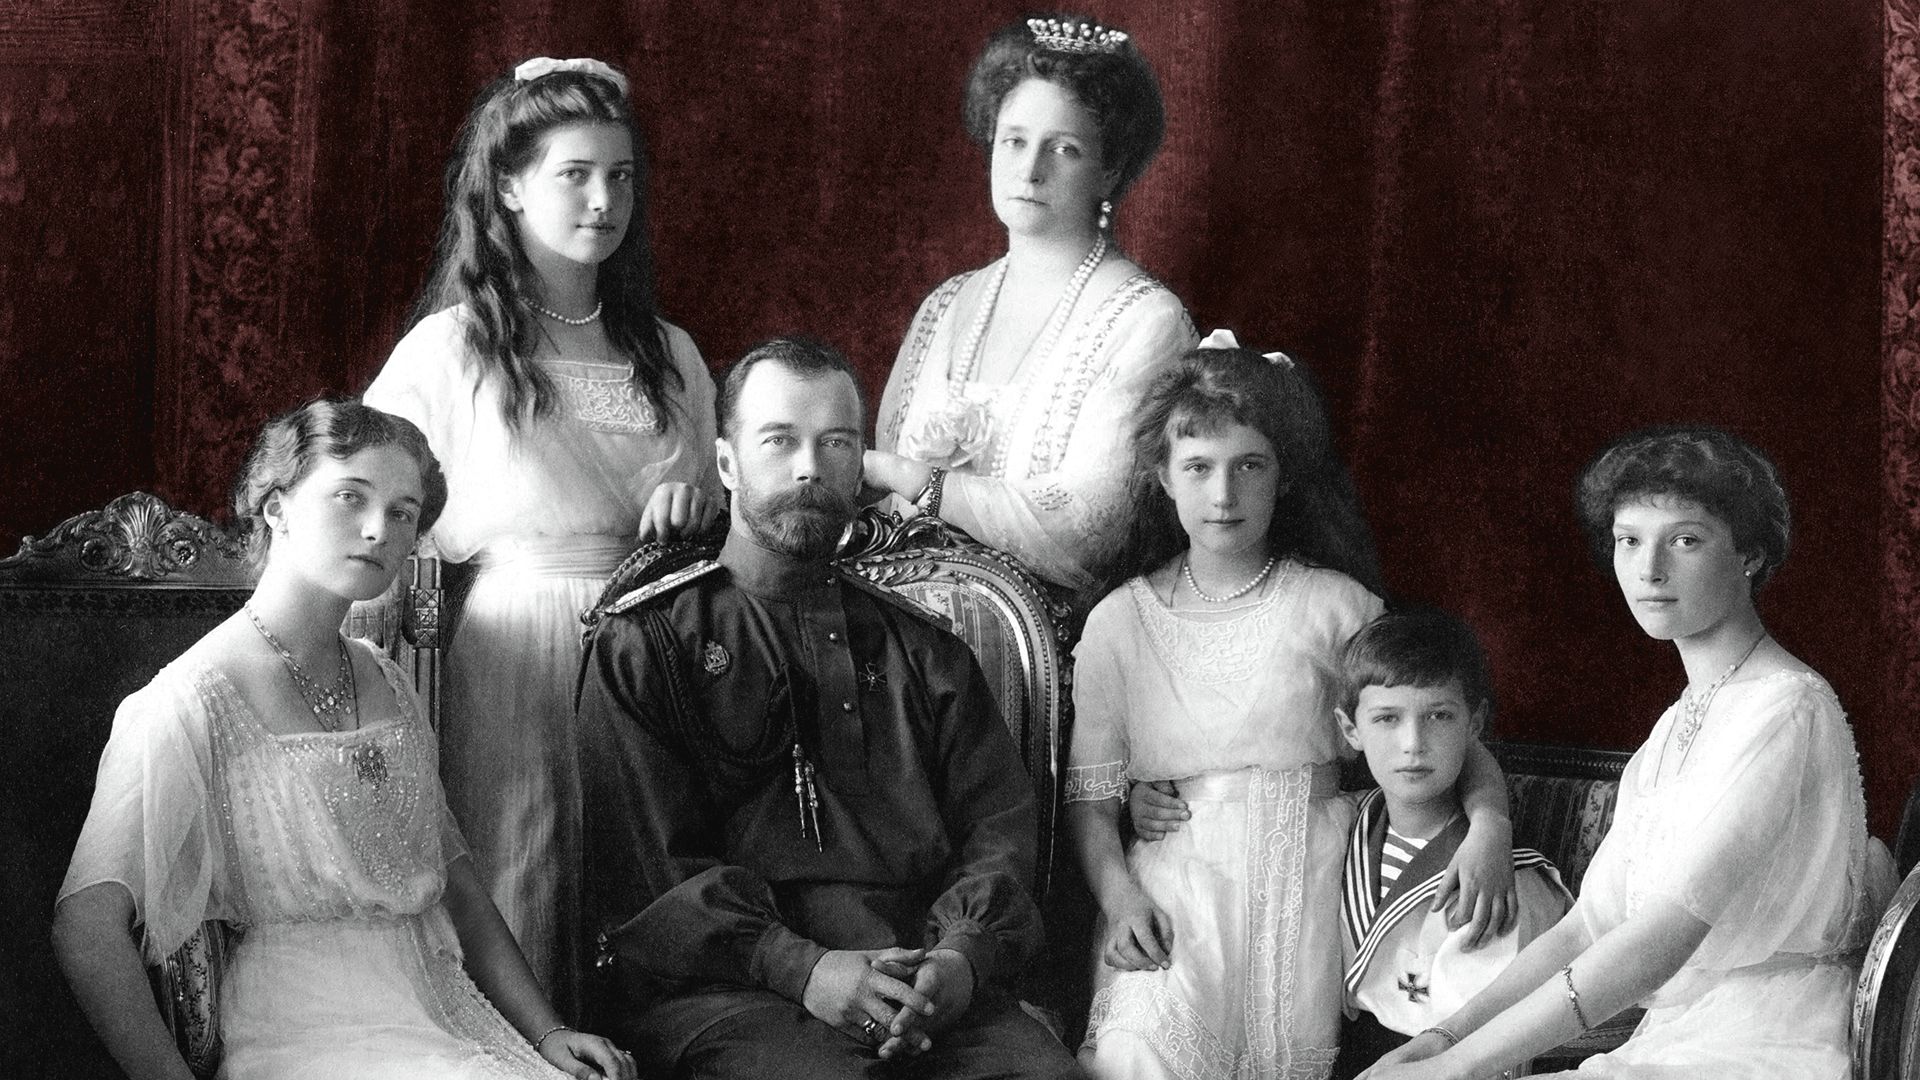 The Reign of Russian Czars: Unraveling the Power and Intrigue of the 19th Century